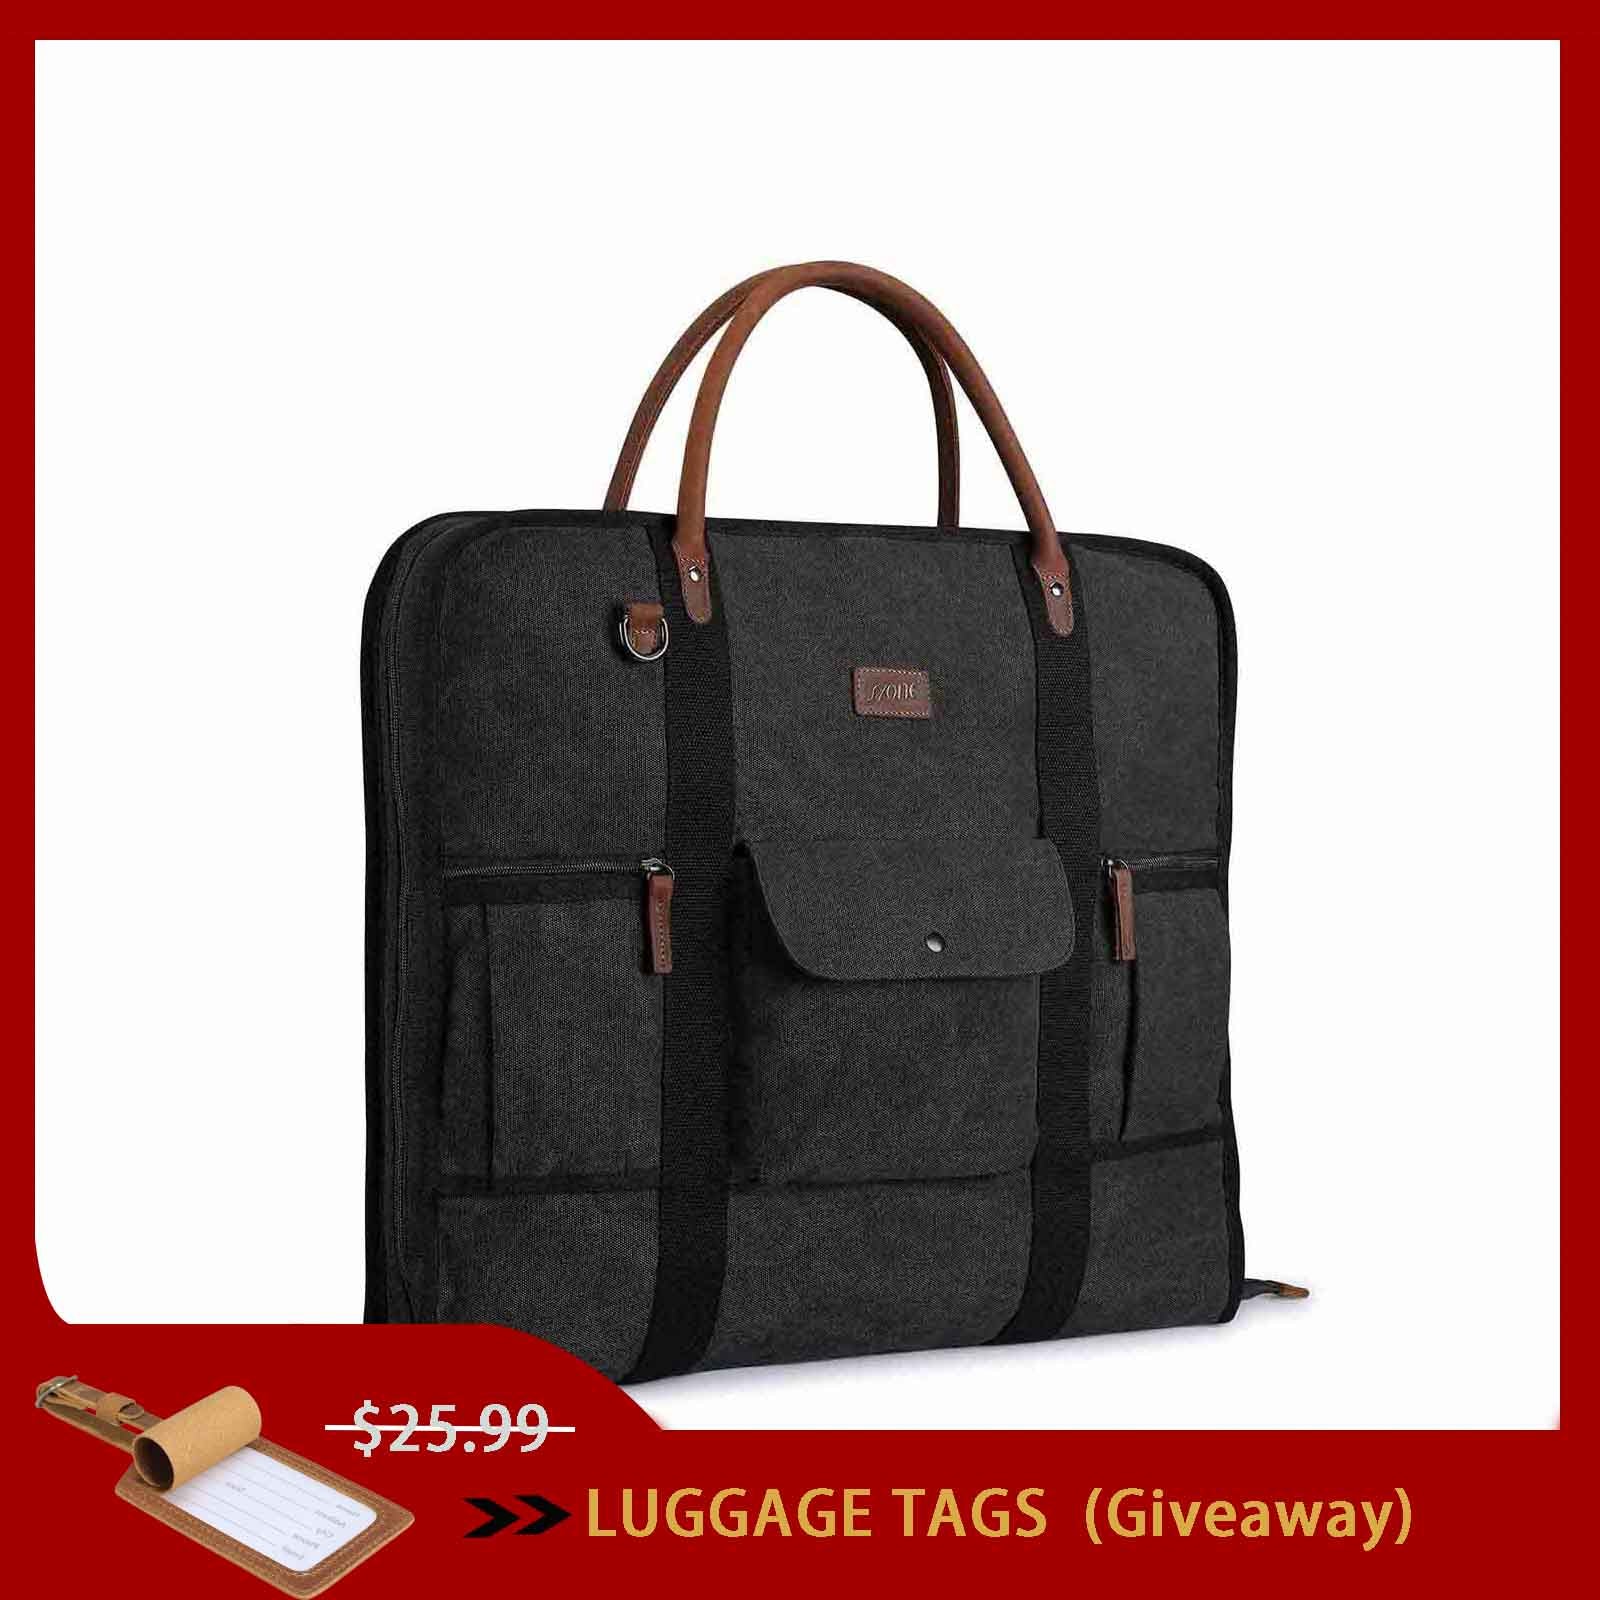 Hanging Carry On Garment Bag Fit 3 Suits, 40 inch Suit Bag for Travel and  Business Trips with Shoulder Strap